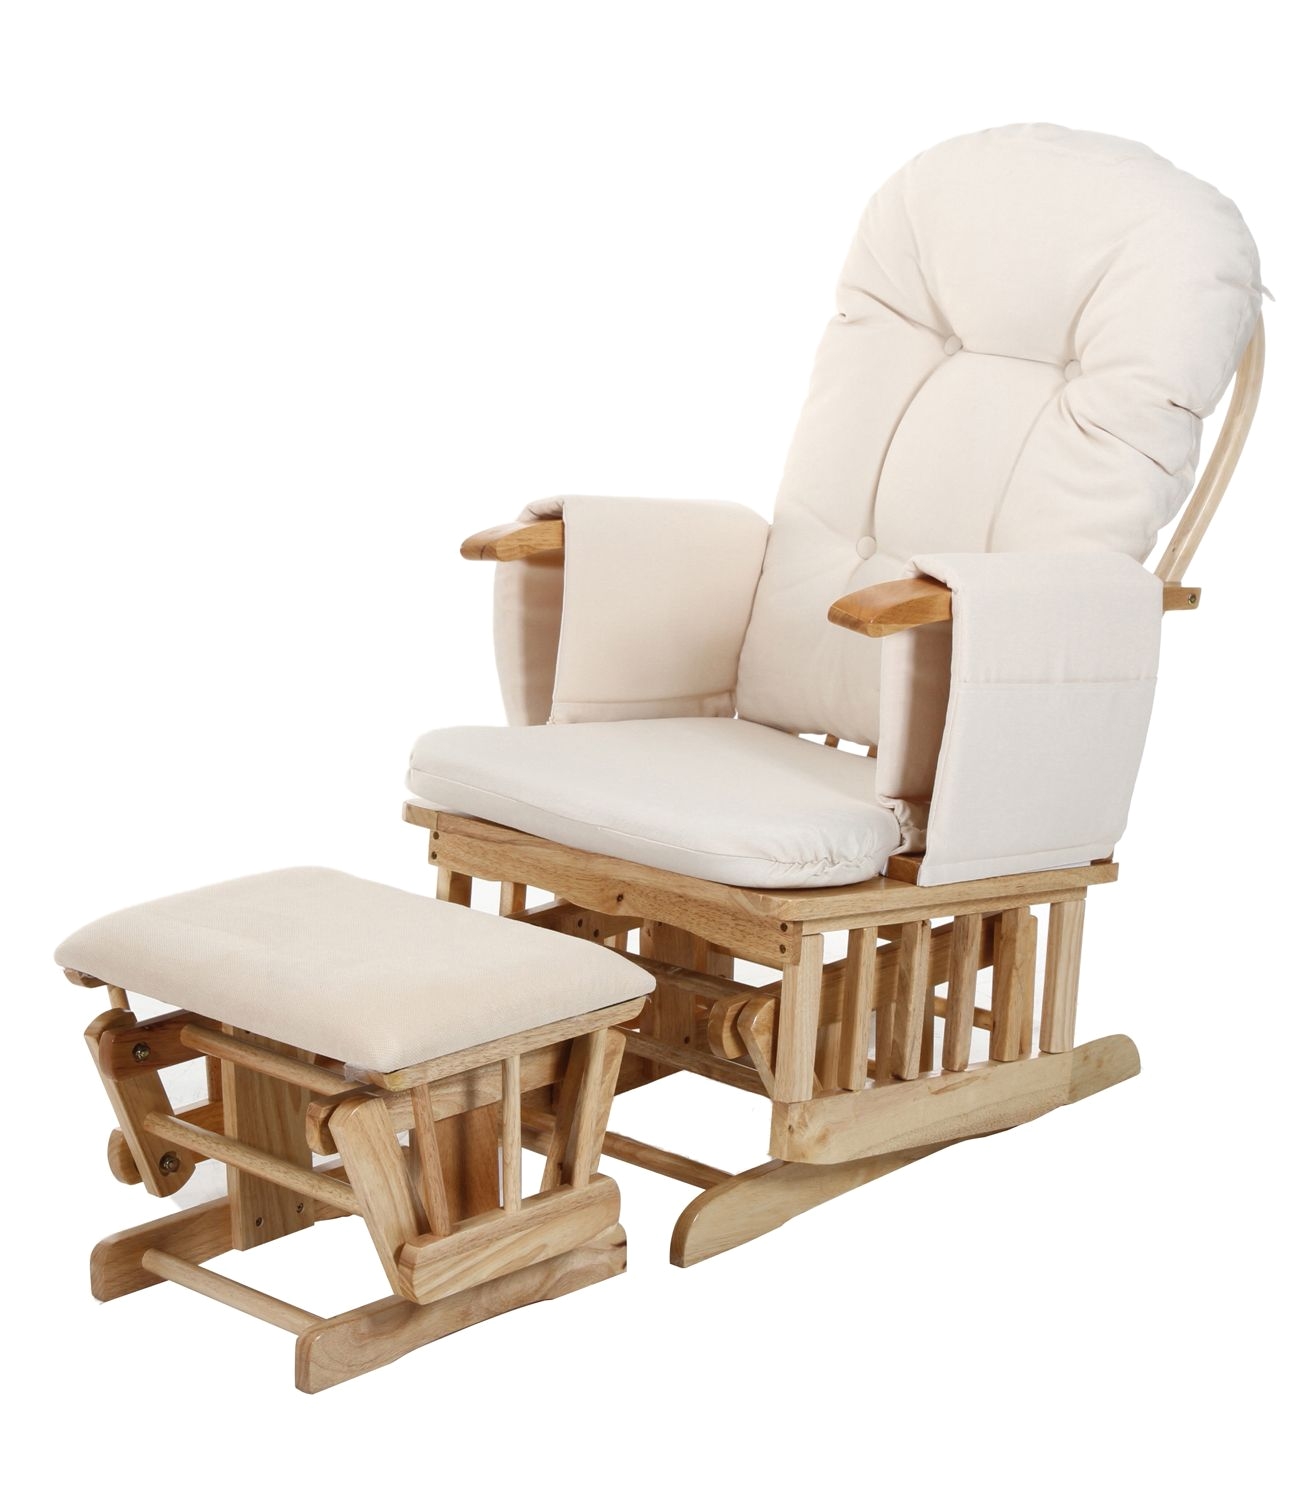 Toys R Us Rocking Chair Glider Buy Your Baby Weavers Recline Glider Stool From Kiddicare Nursing